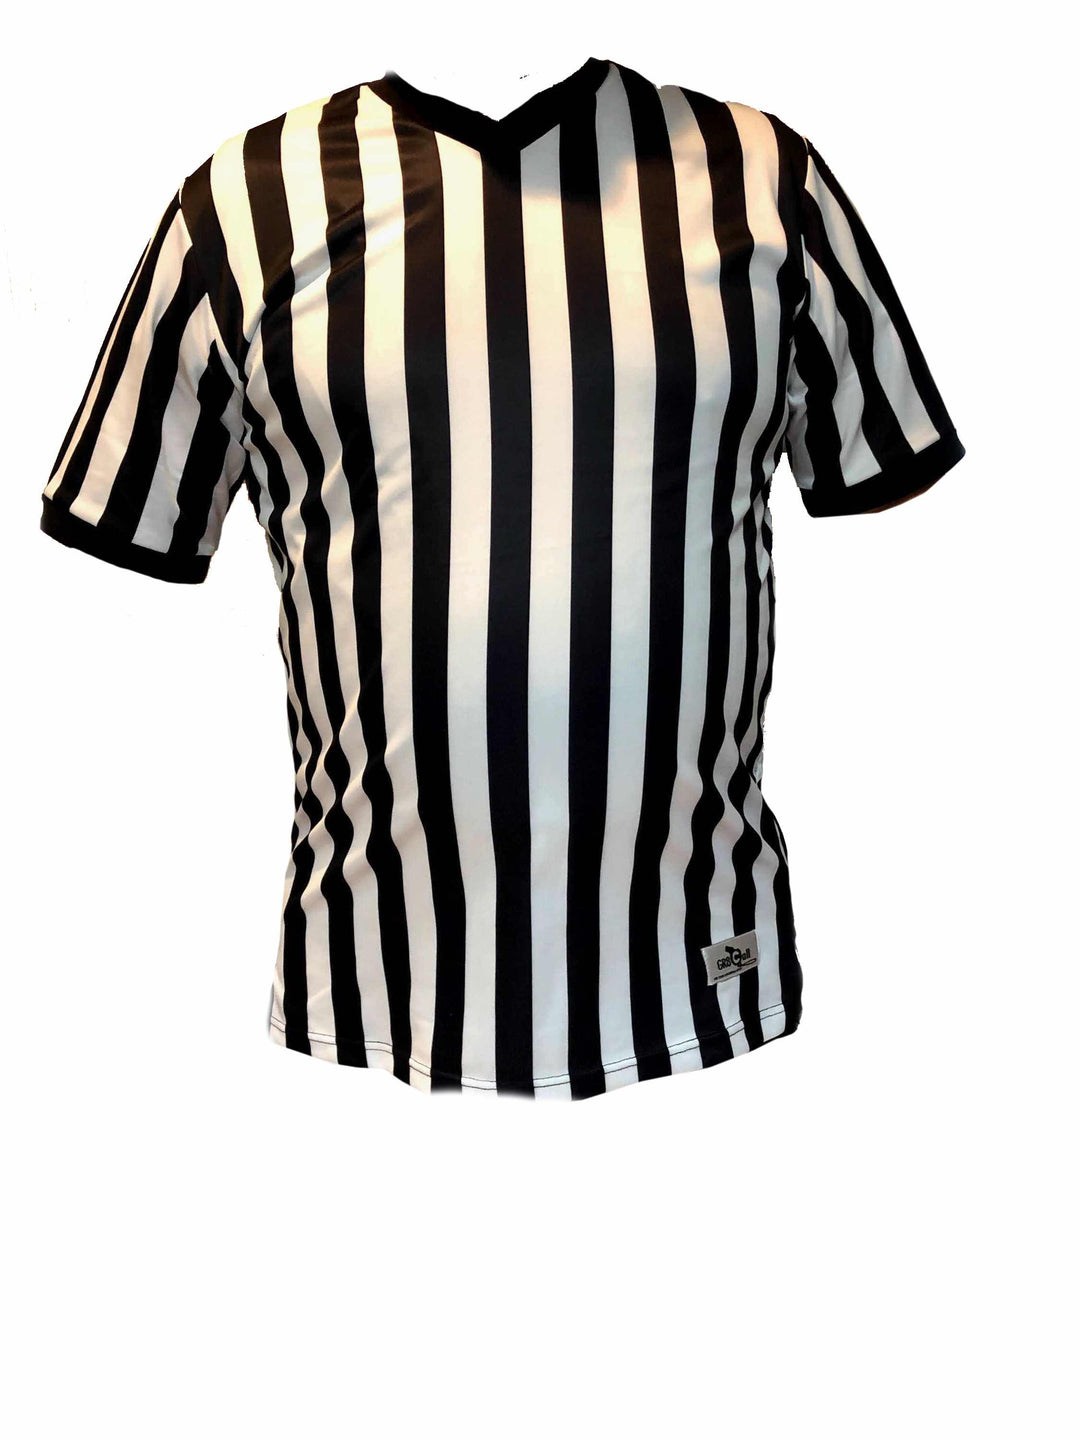 Ultra-Tech Referee Shirt with American Flag